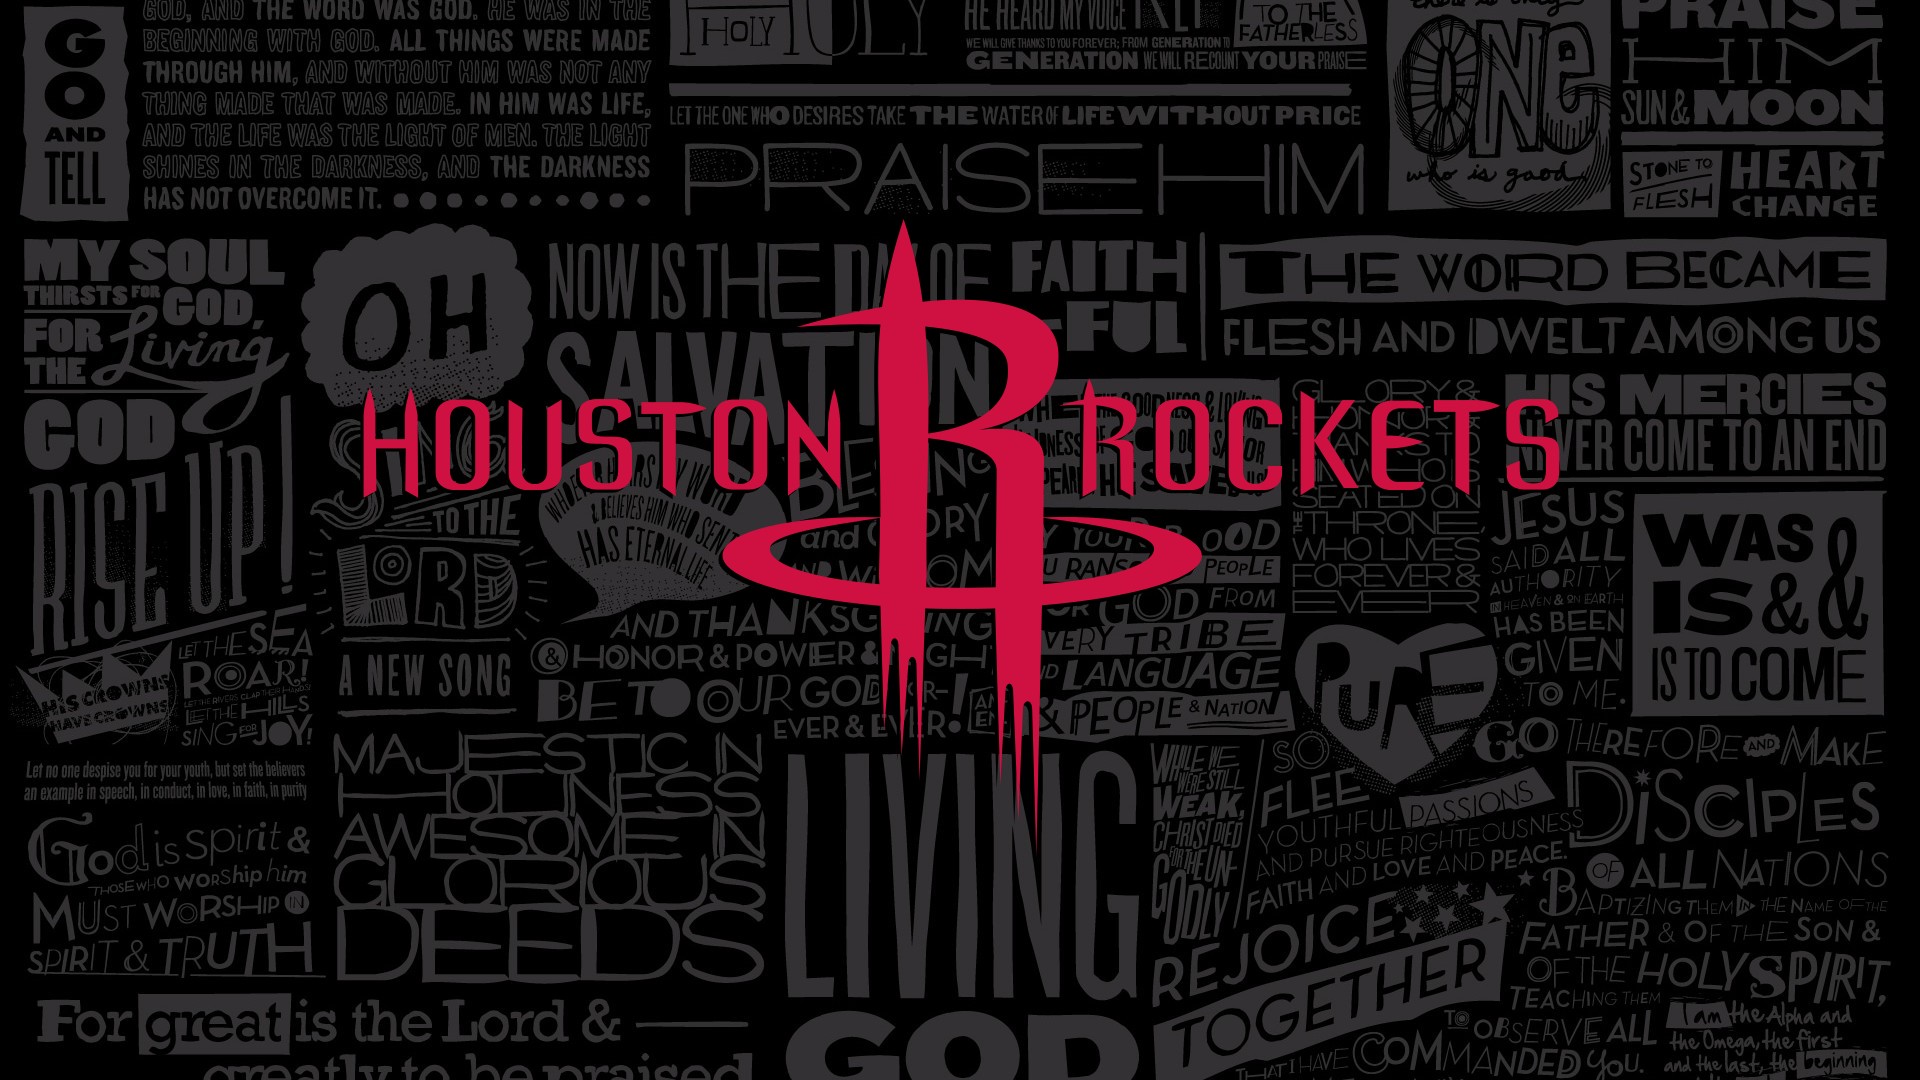 Houston Rockets Wallpaper with image dimensions 1920x1080 pixel. You can make this wallpaper for your Desktop Computer Backgrounds, Windows or Mac Screensavers, iPhone Lock screen, Tablet or Android and another Mobile Phone device